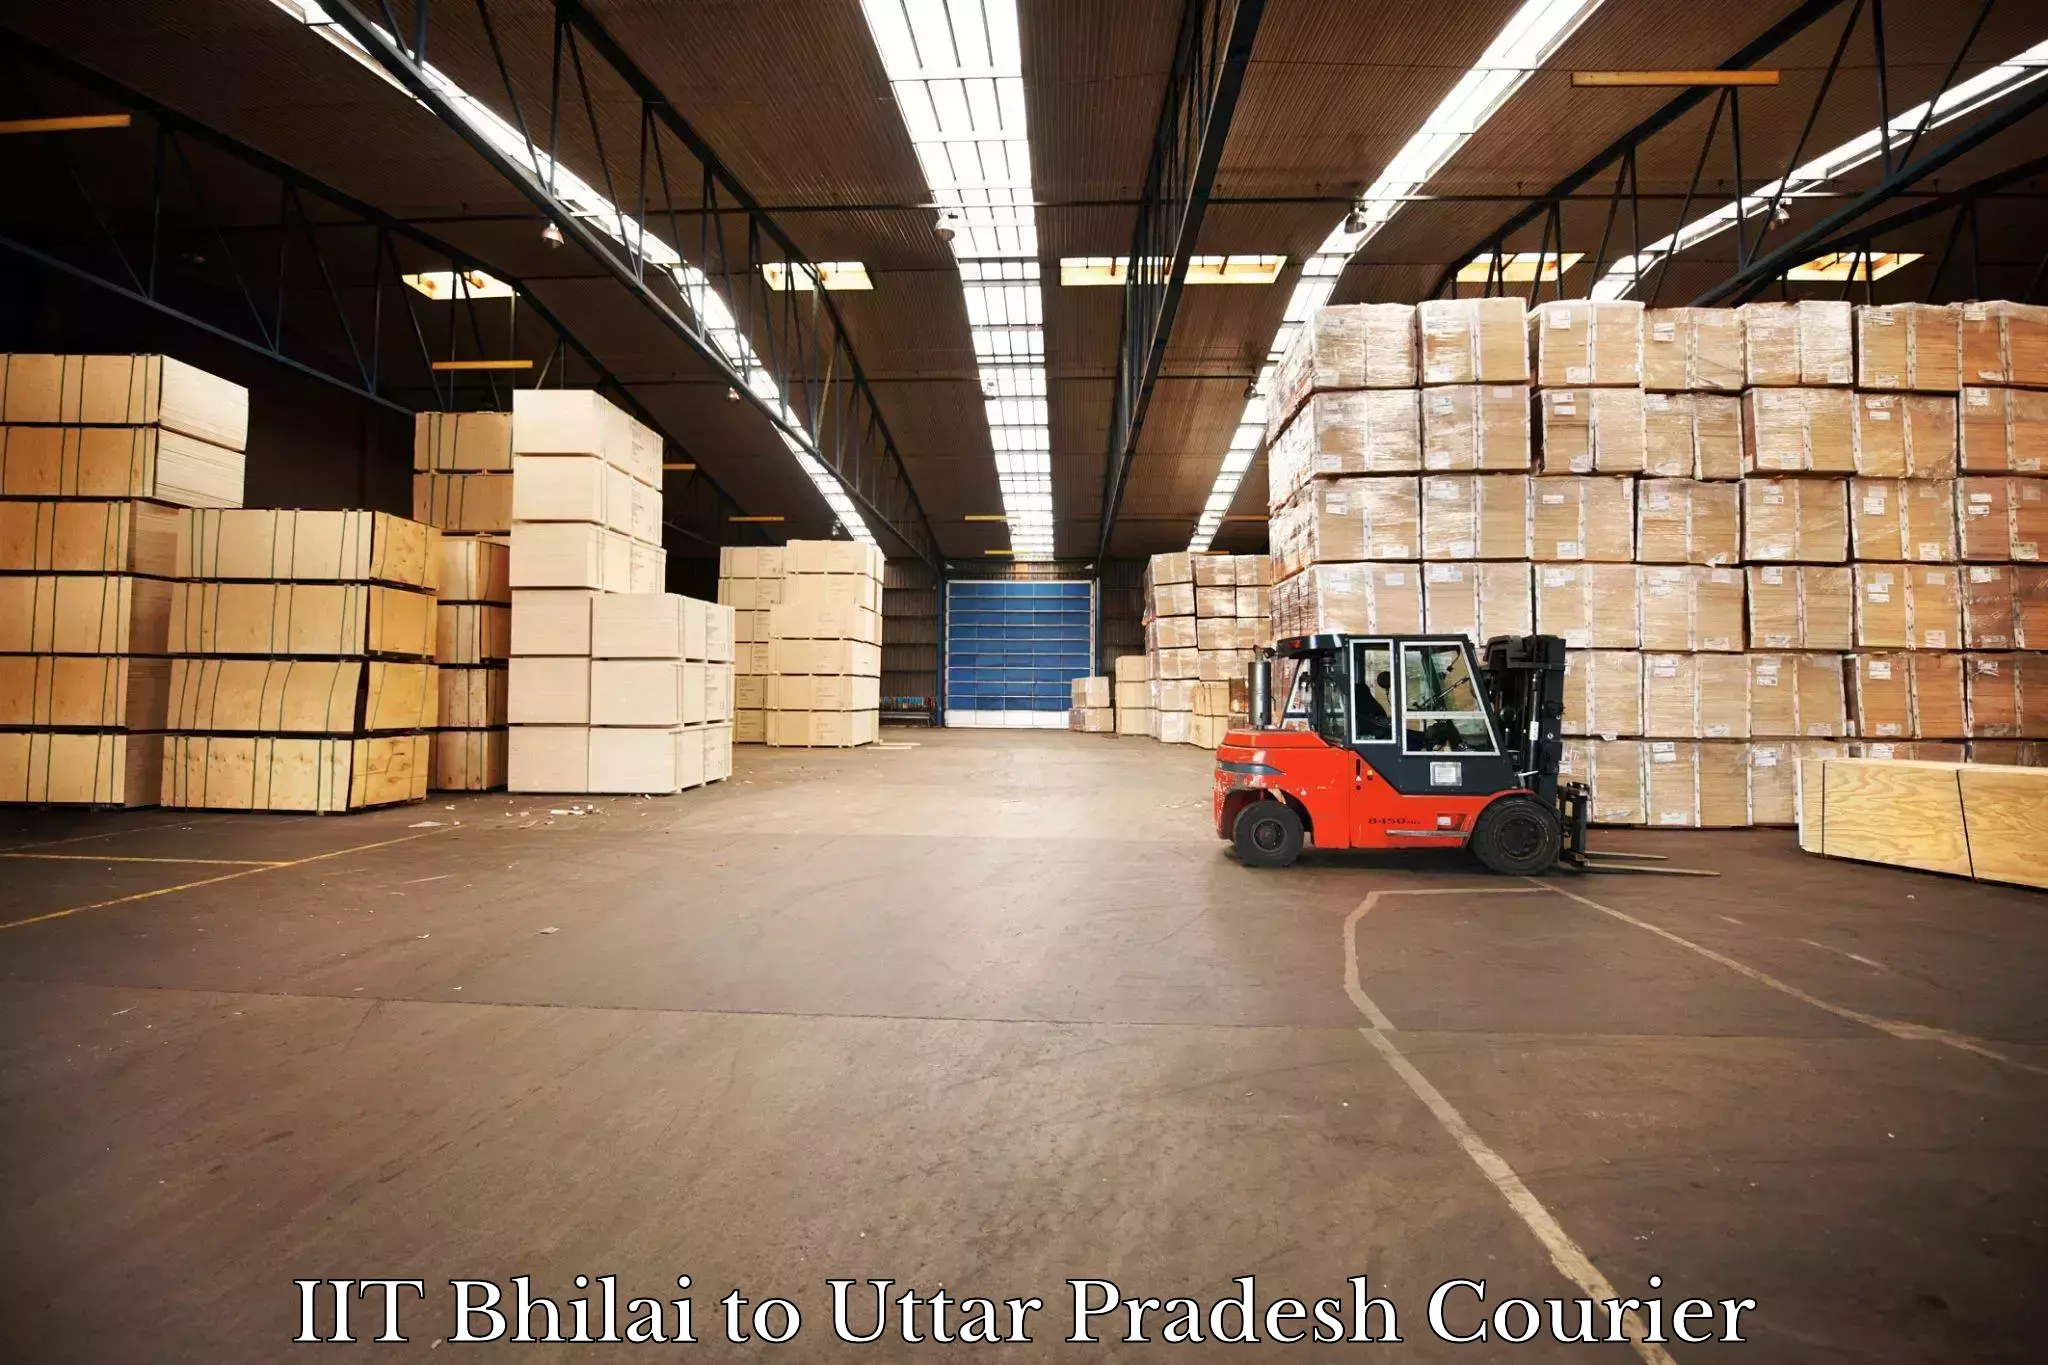 Seamless shipping experience IIT Bhilai to Dostpur